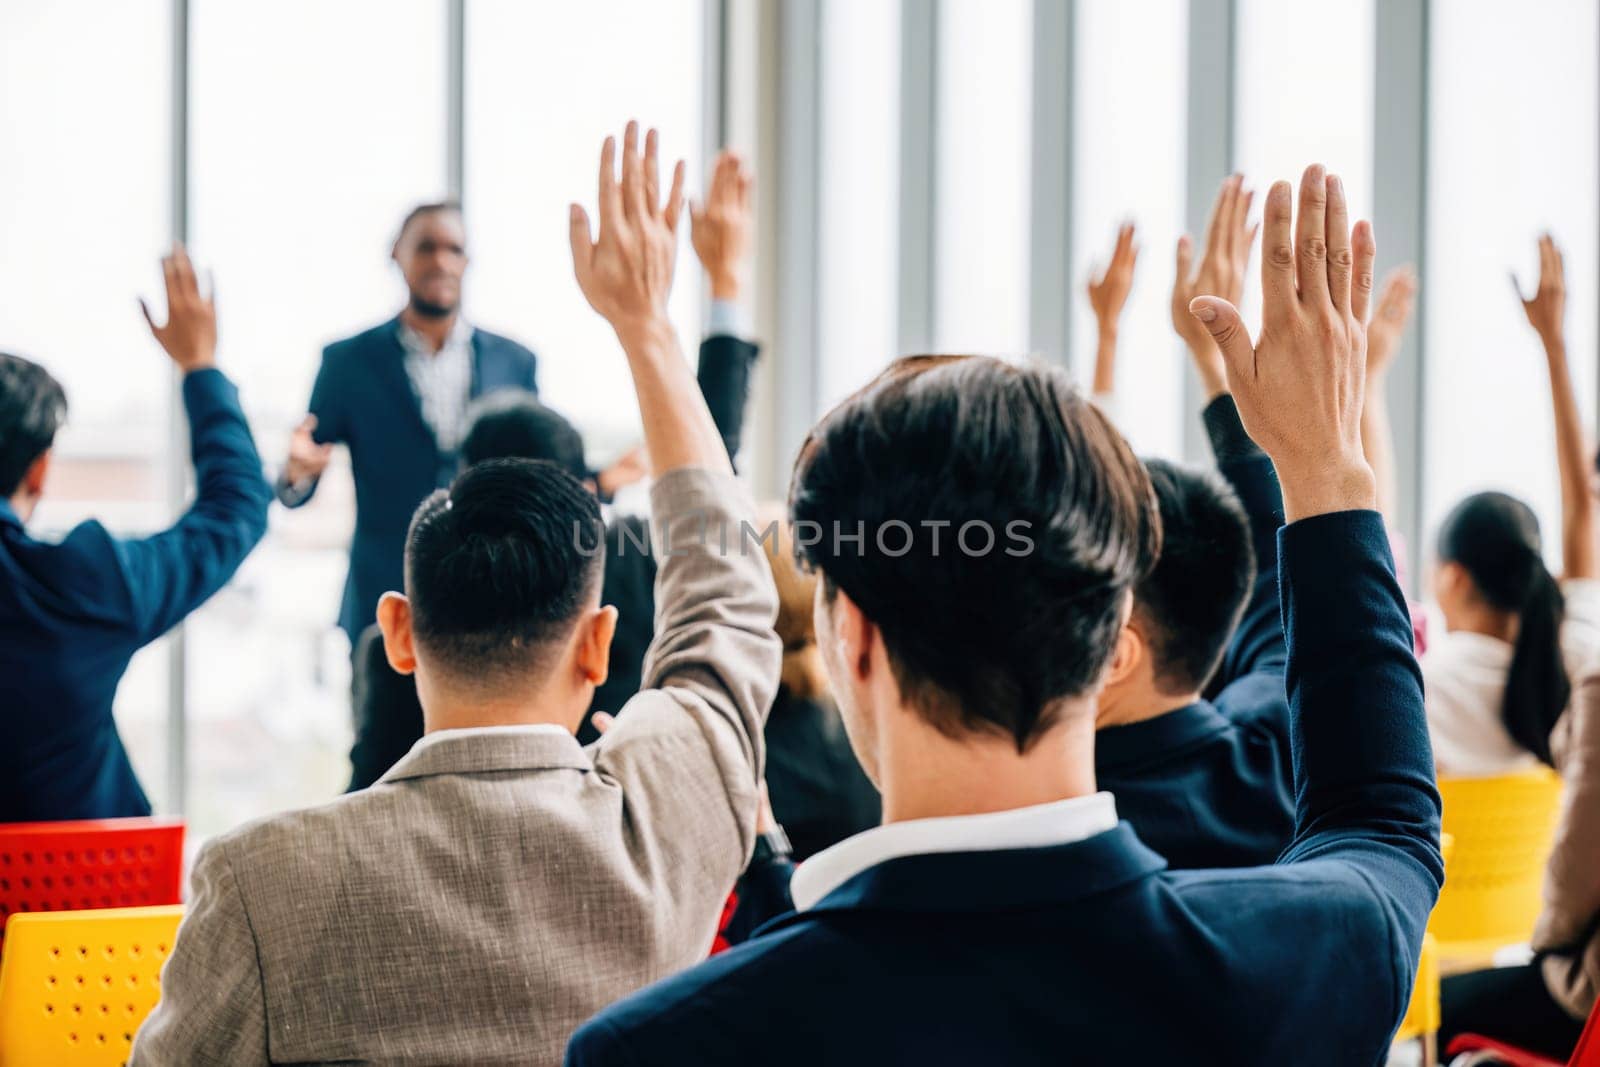 A meeting seminar and strategy session take place in the boardroom. Questions are posed and hands are raised demonstrating teamwork among colleagues and employees. by Sorapop